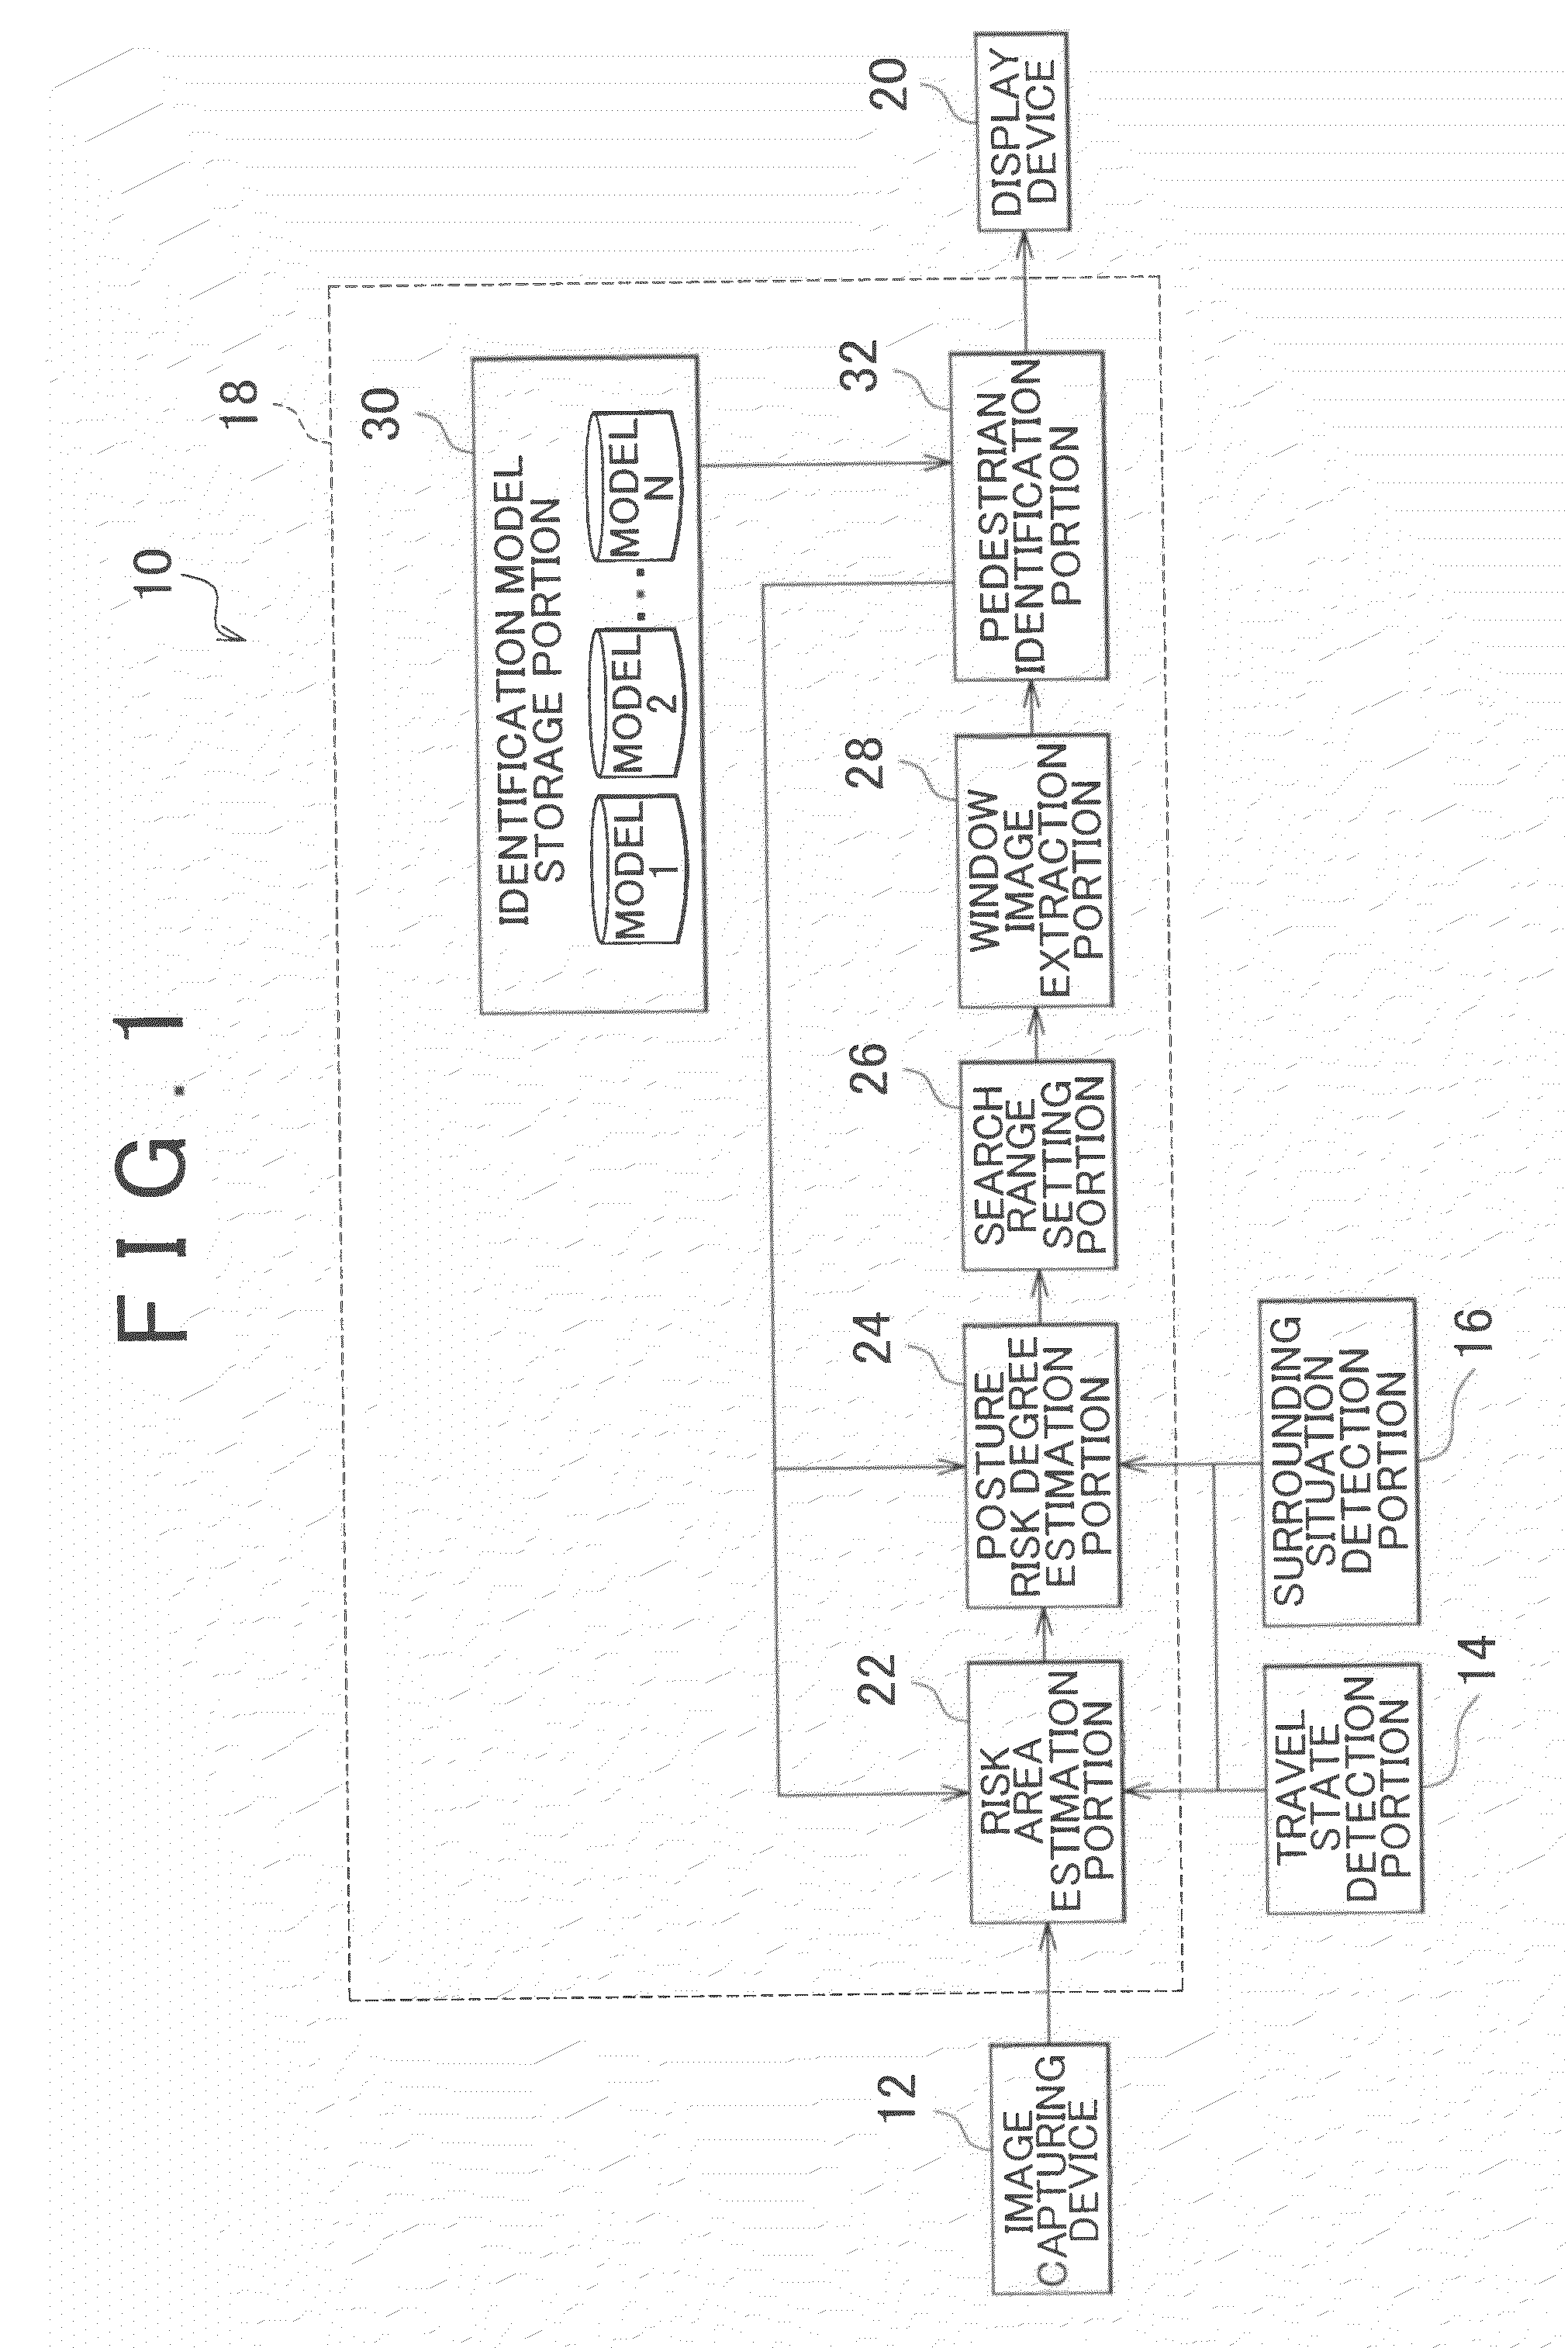 Object detection apparatus and storage medium storing object detection program